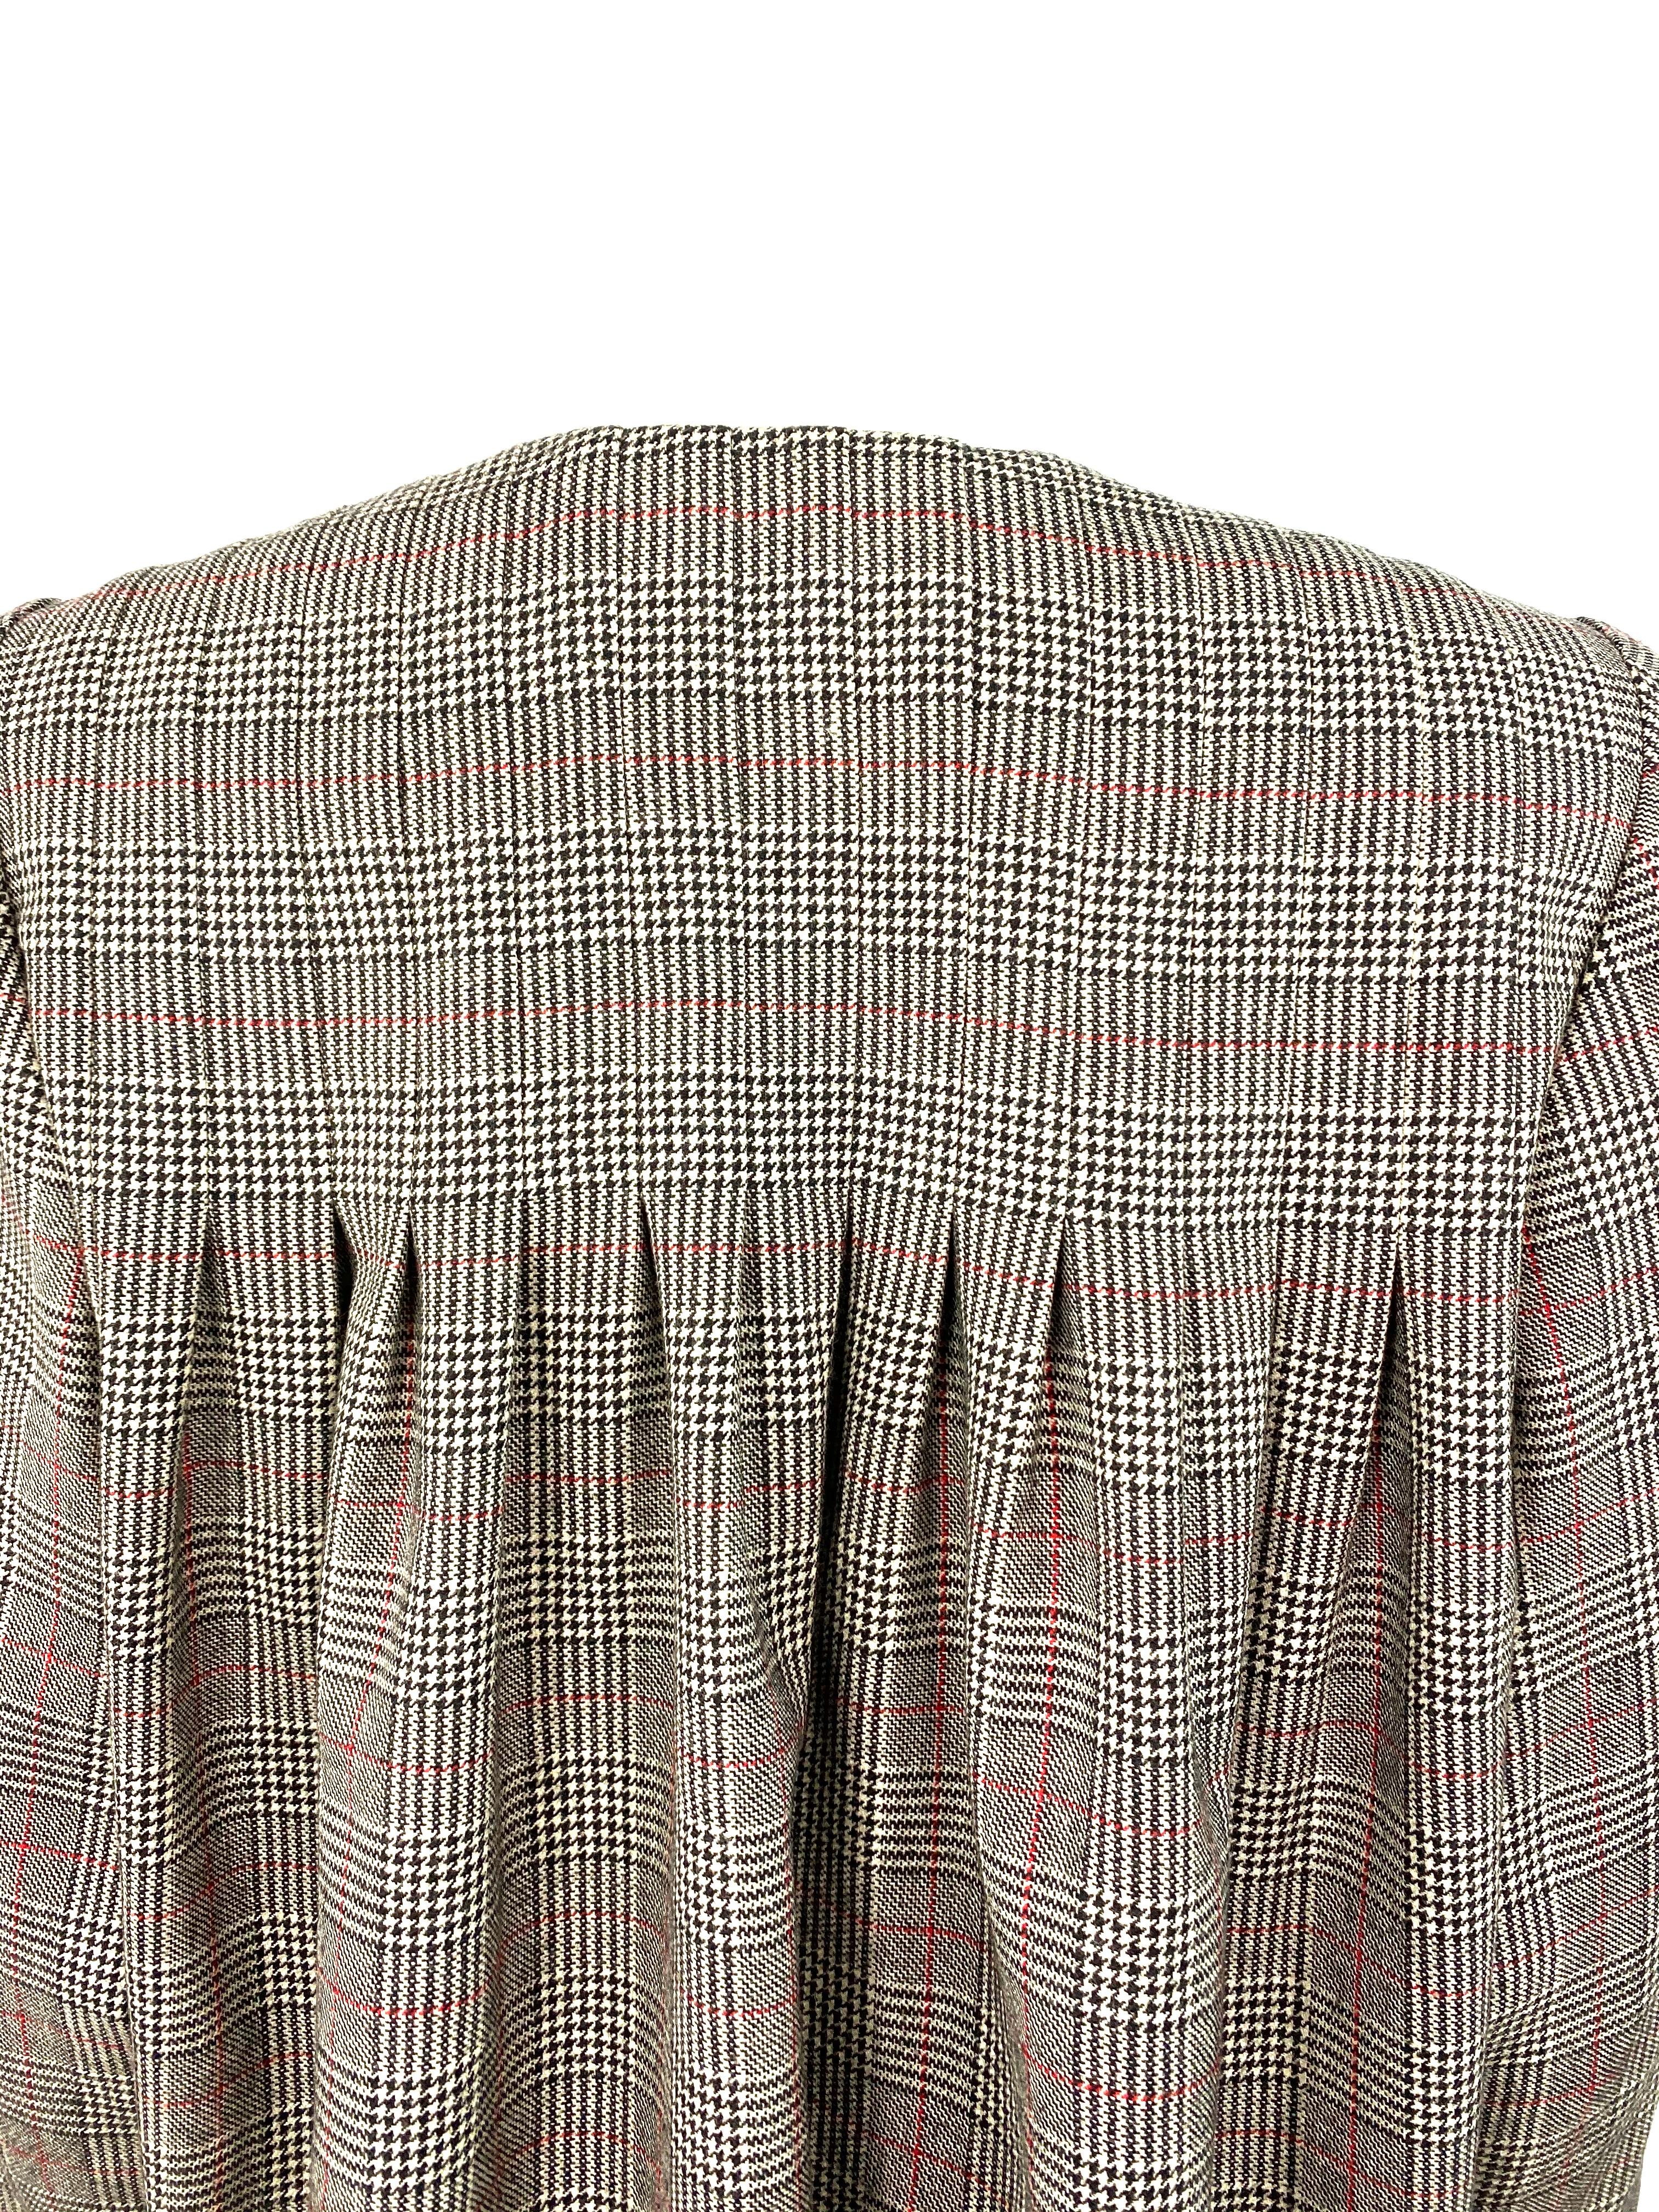 Galanos Amen Wardy Grey and Red Check Plaid Jacket  For Sale 3